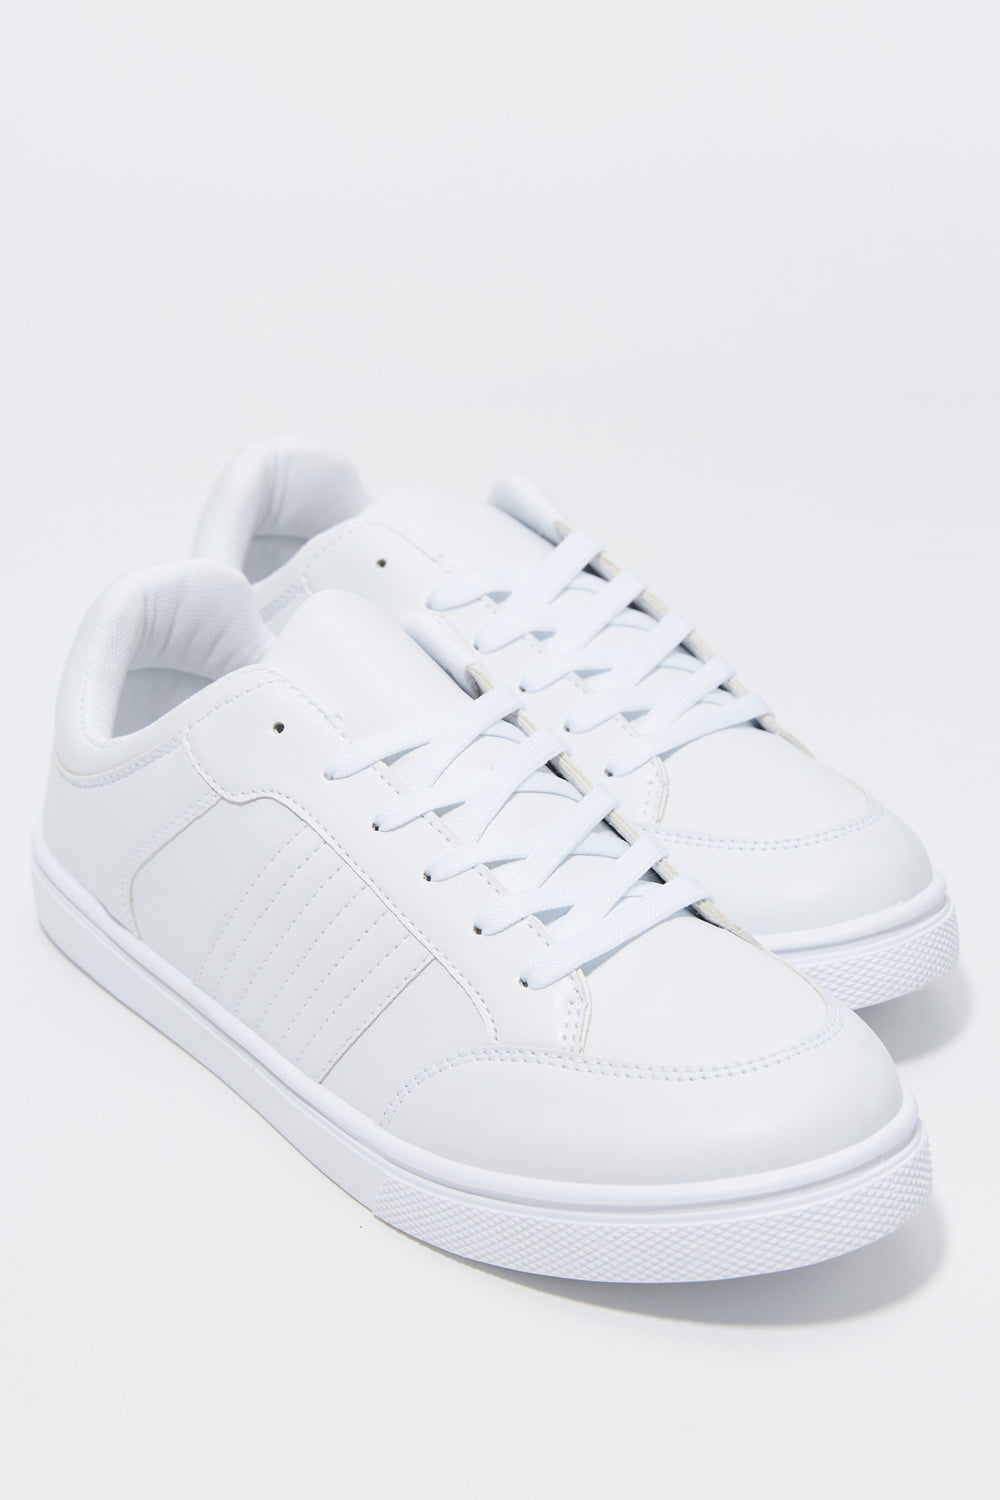 Low Top Casual Canvas Sneaker Low Top Casual Canvas Sneaker 15